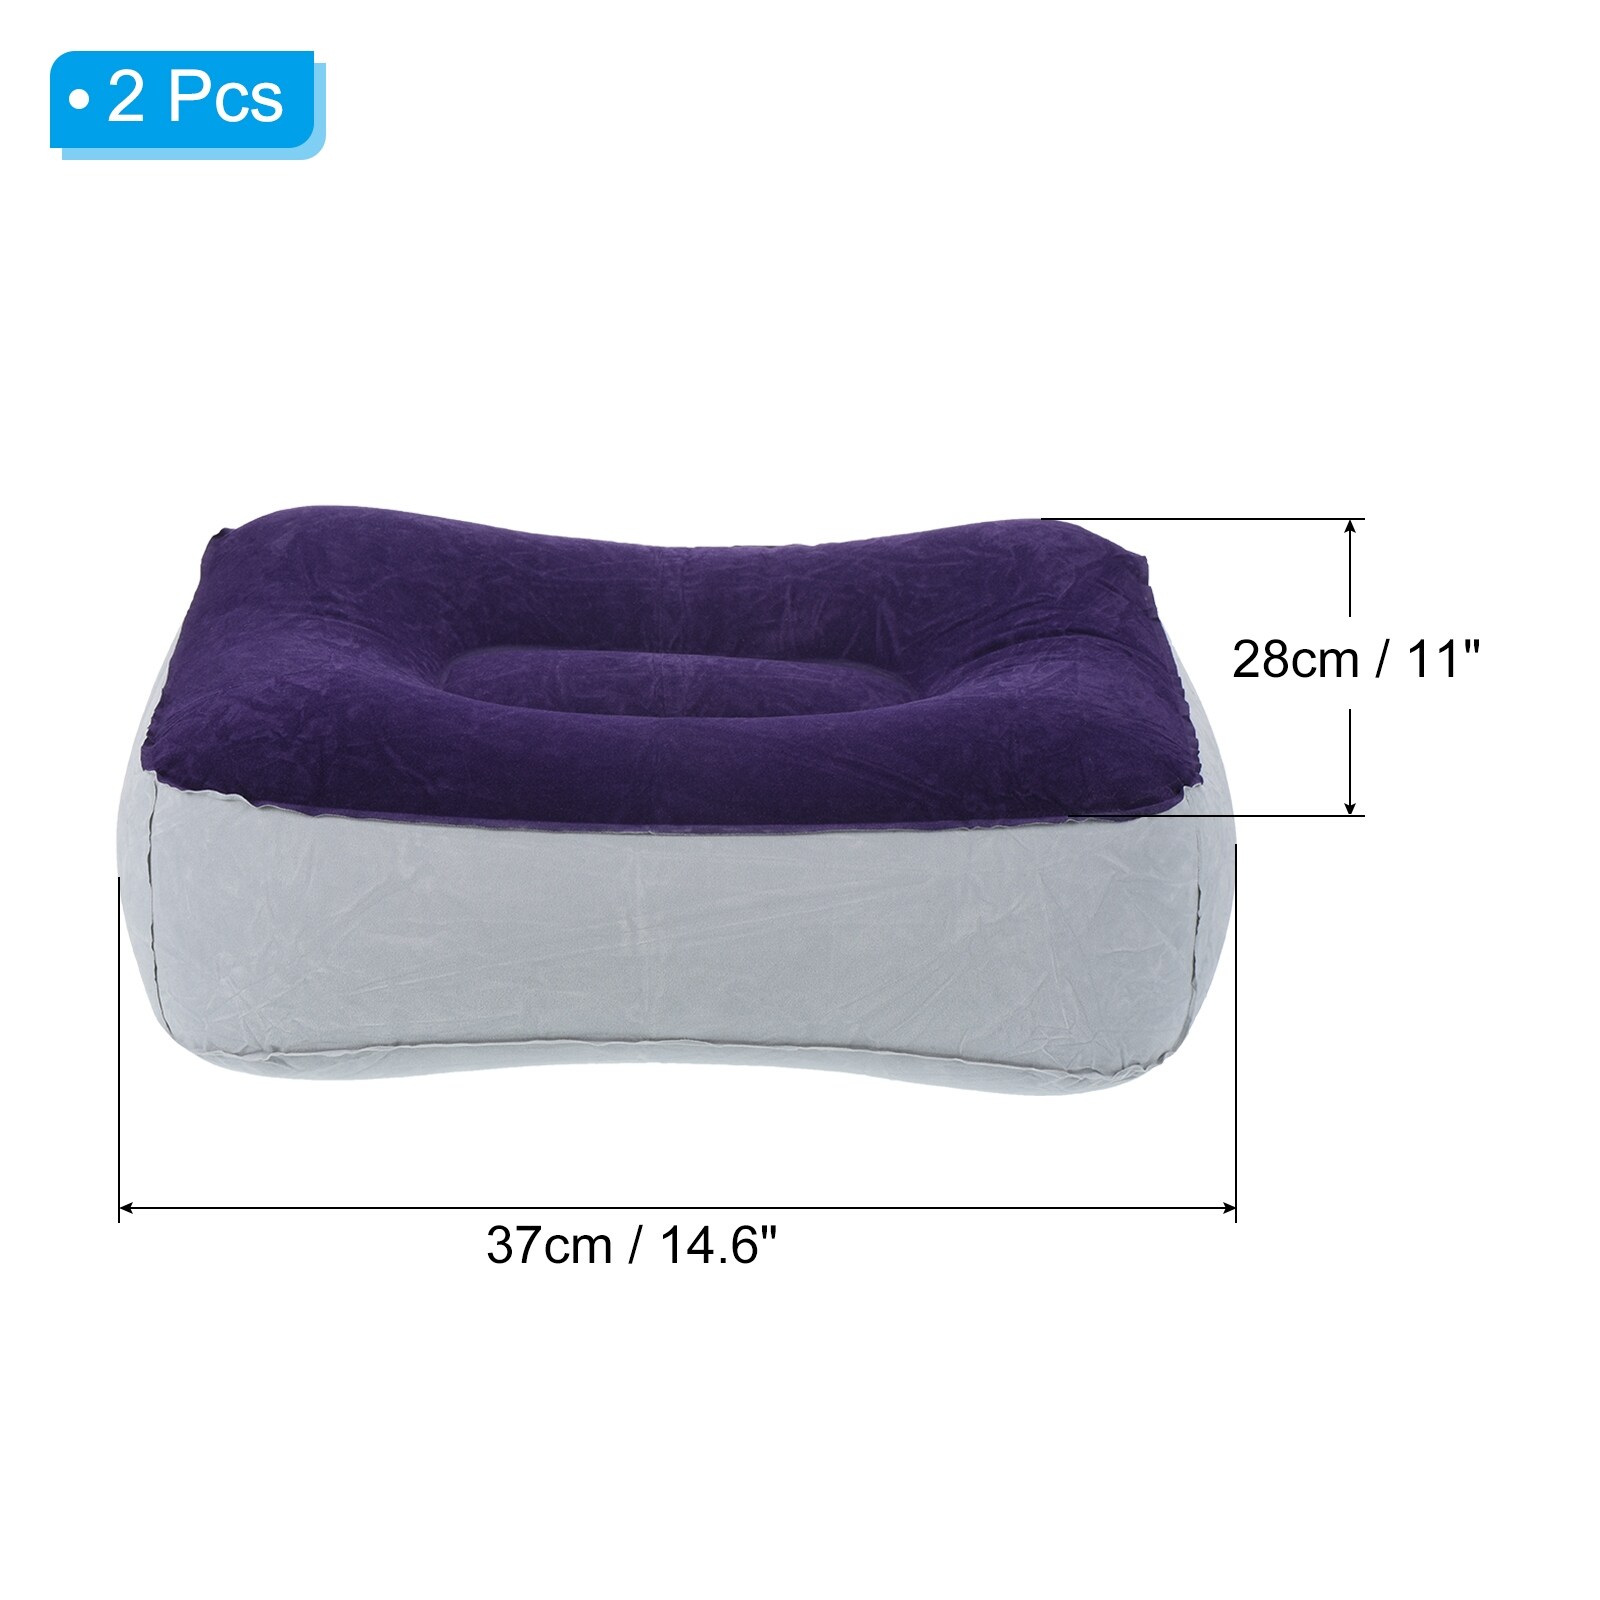 2pcs Travel Foot Rest Pillow, Inflatable Foot Rest Airplane